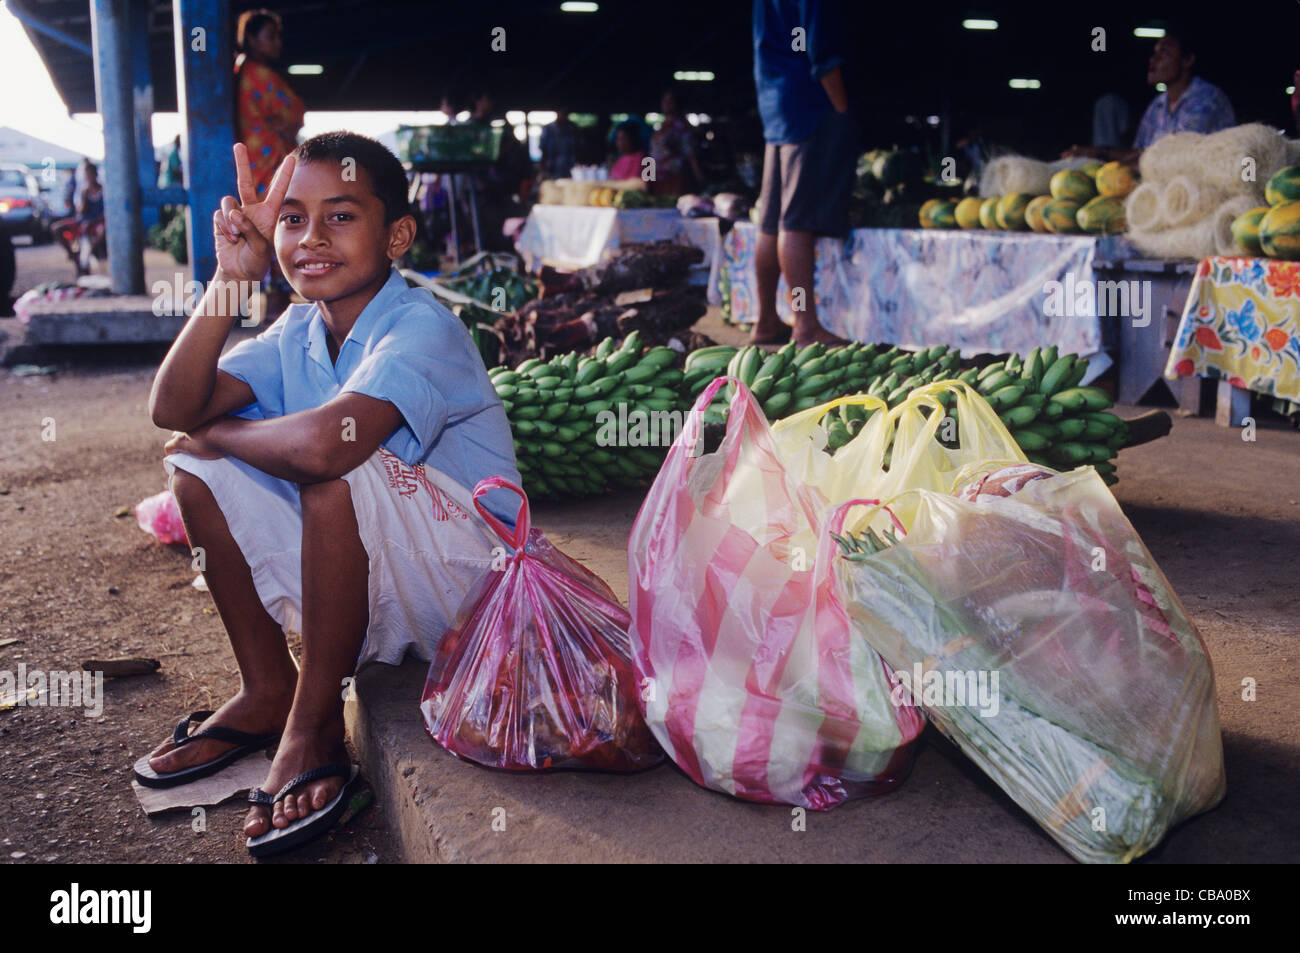 Western Samoa, Apia Farmers Market, portrait of boy at market with his families purchases Stock Photo